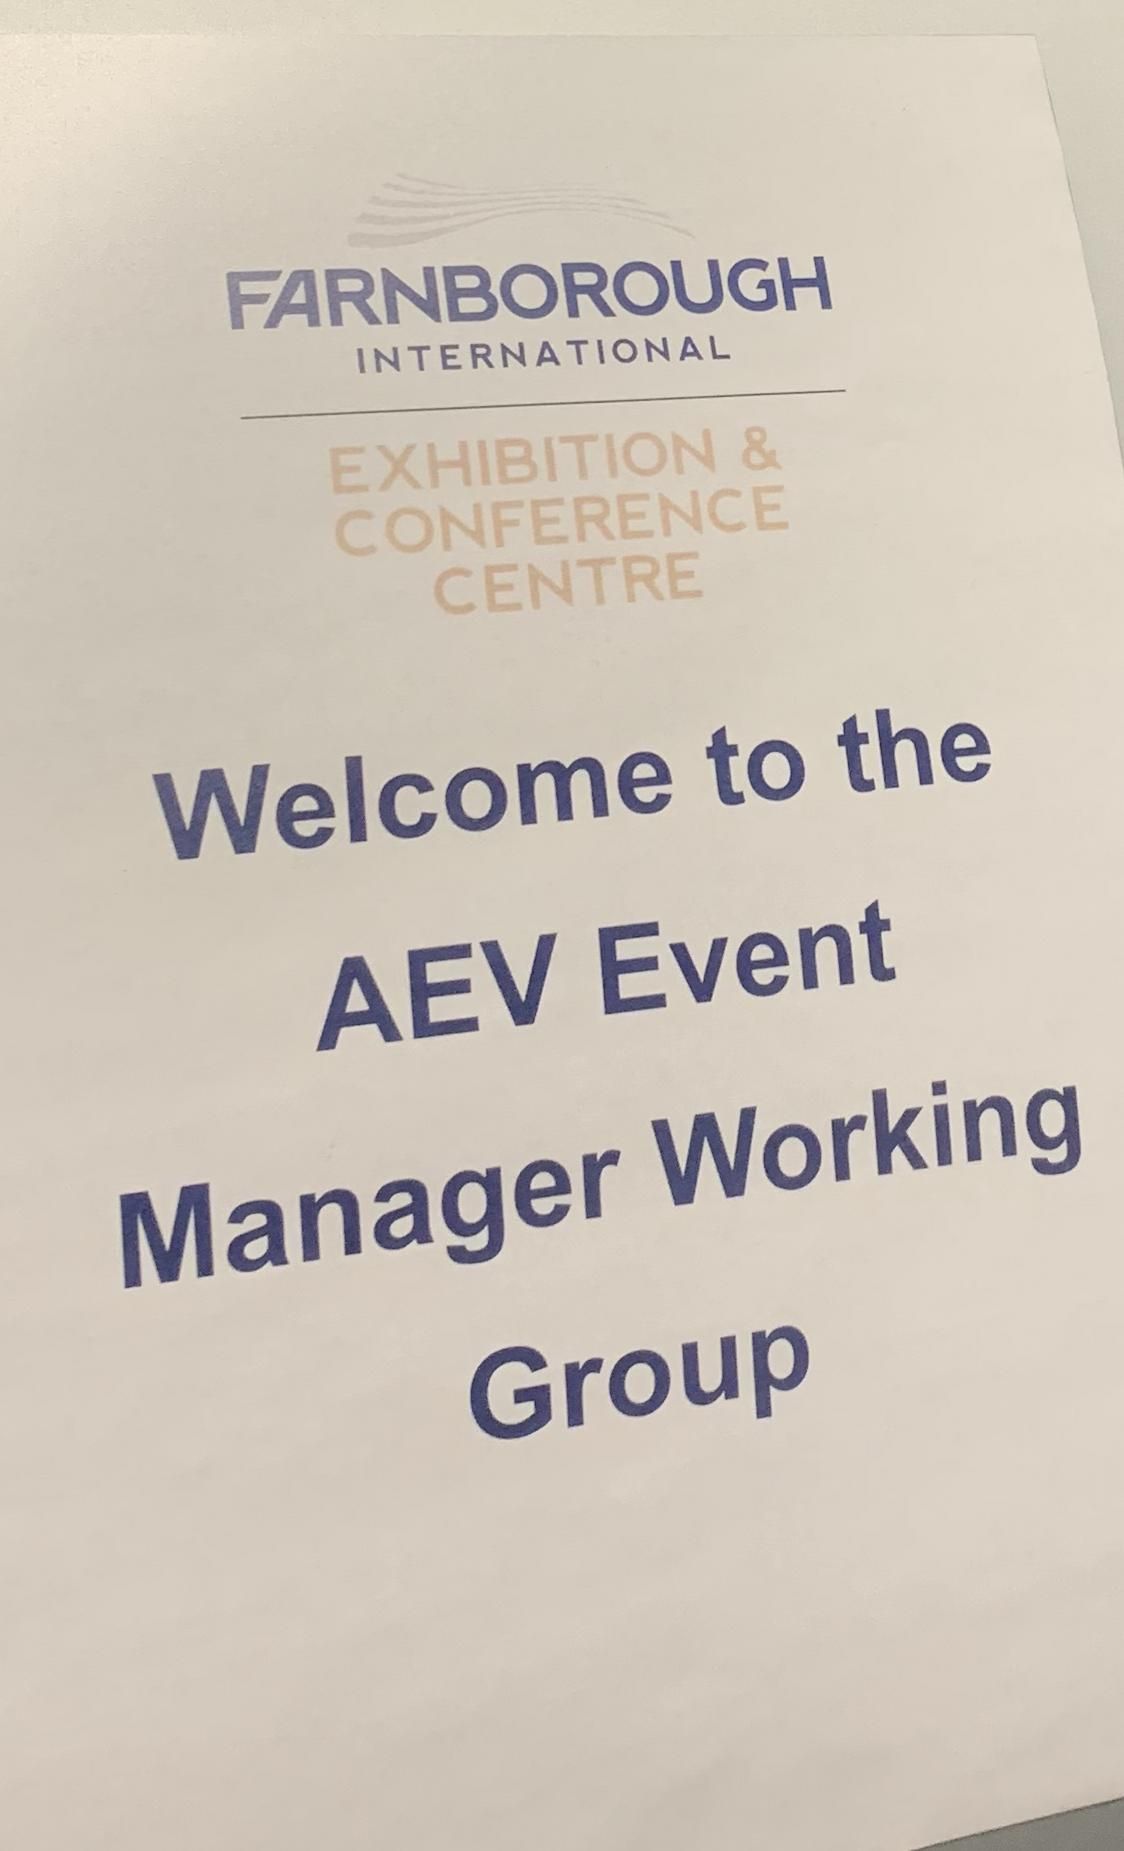 Report: Event Manager Working Group 21.11.18